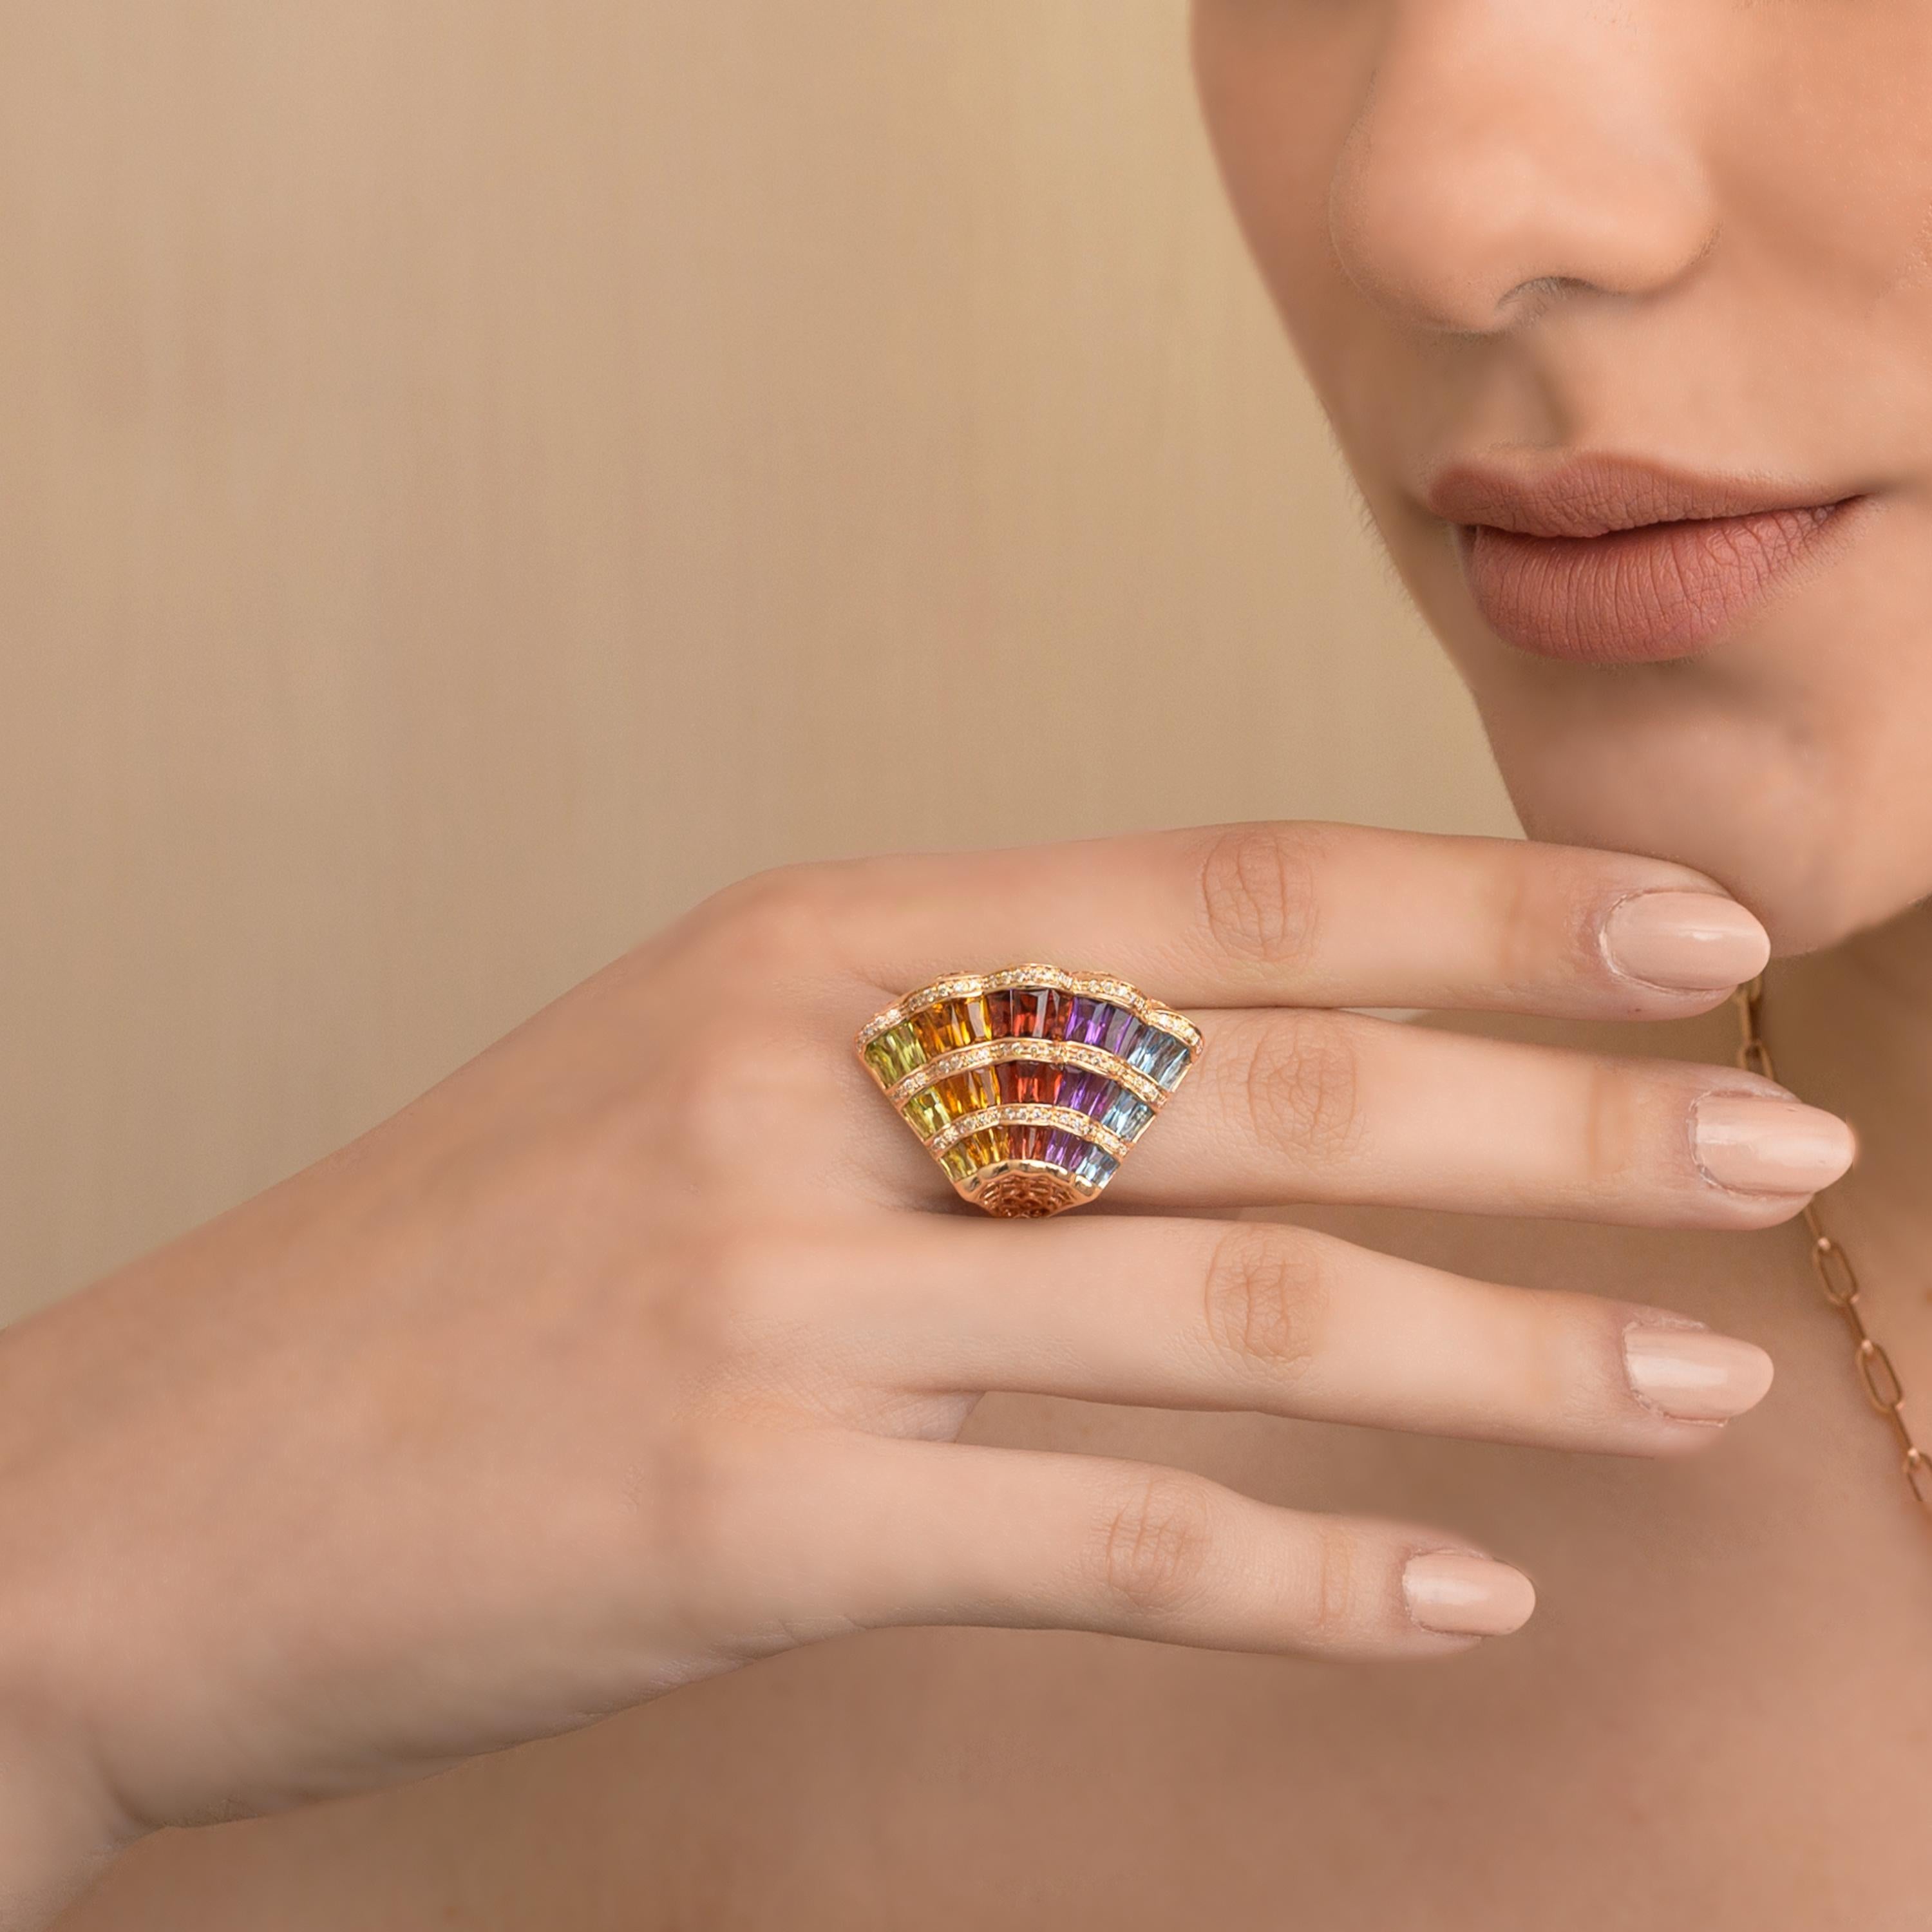 Prepare to be captivated by the sheer beauty and sophistication of this Rainbow Gemstones Wing Cocktail Ring—an absolute stunner that transcends conventional jewelry design. Imbued with grace and color, this remarkable ring is meticulously crafted